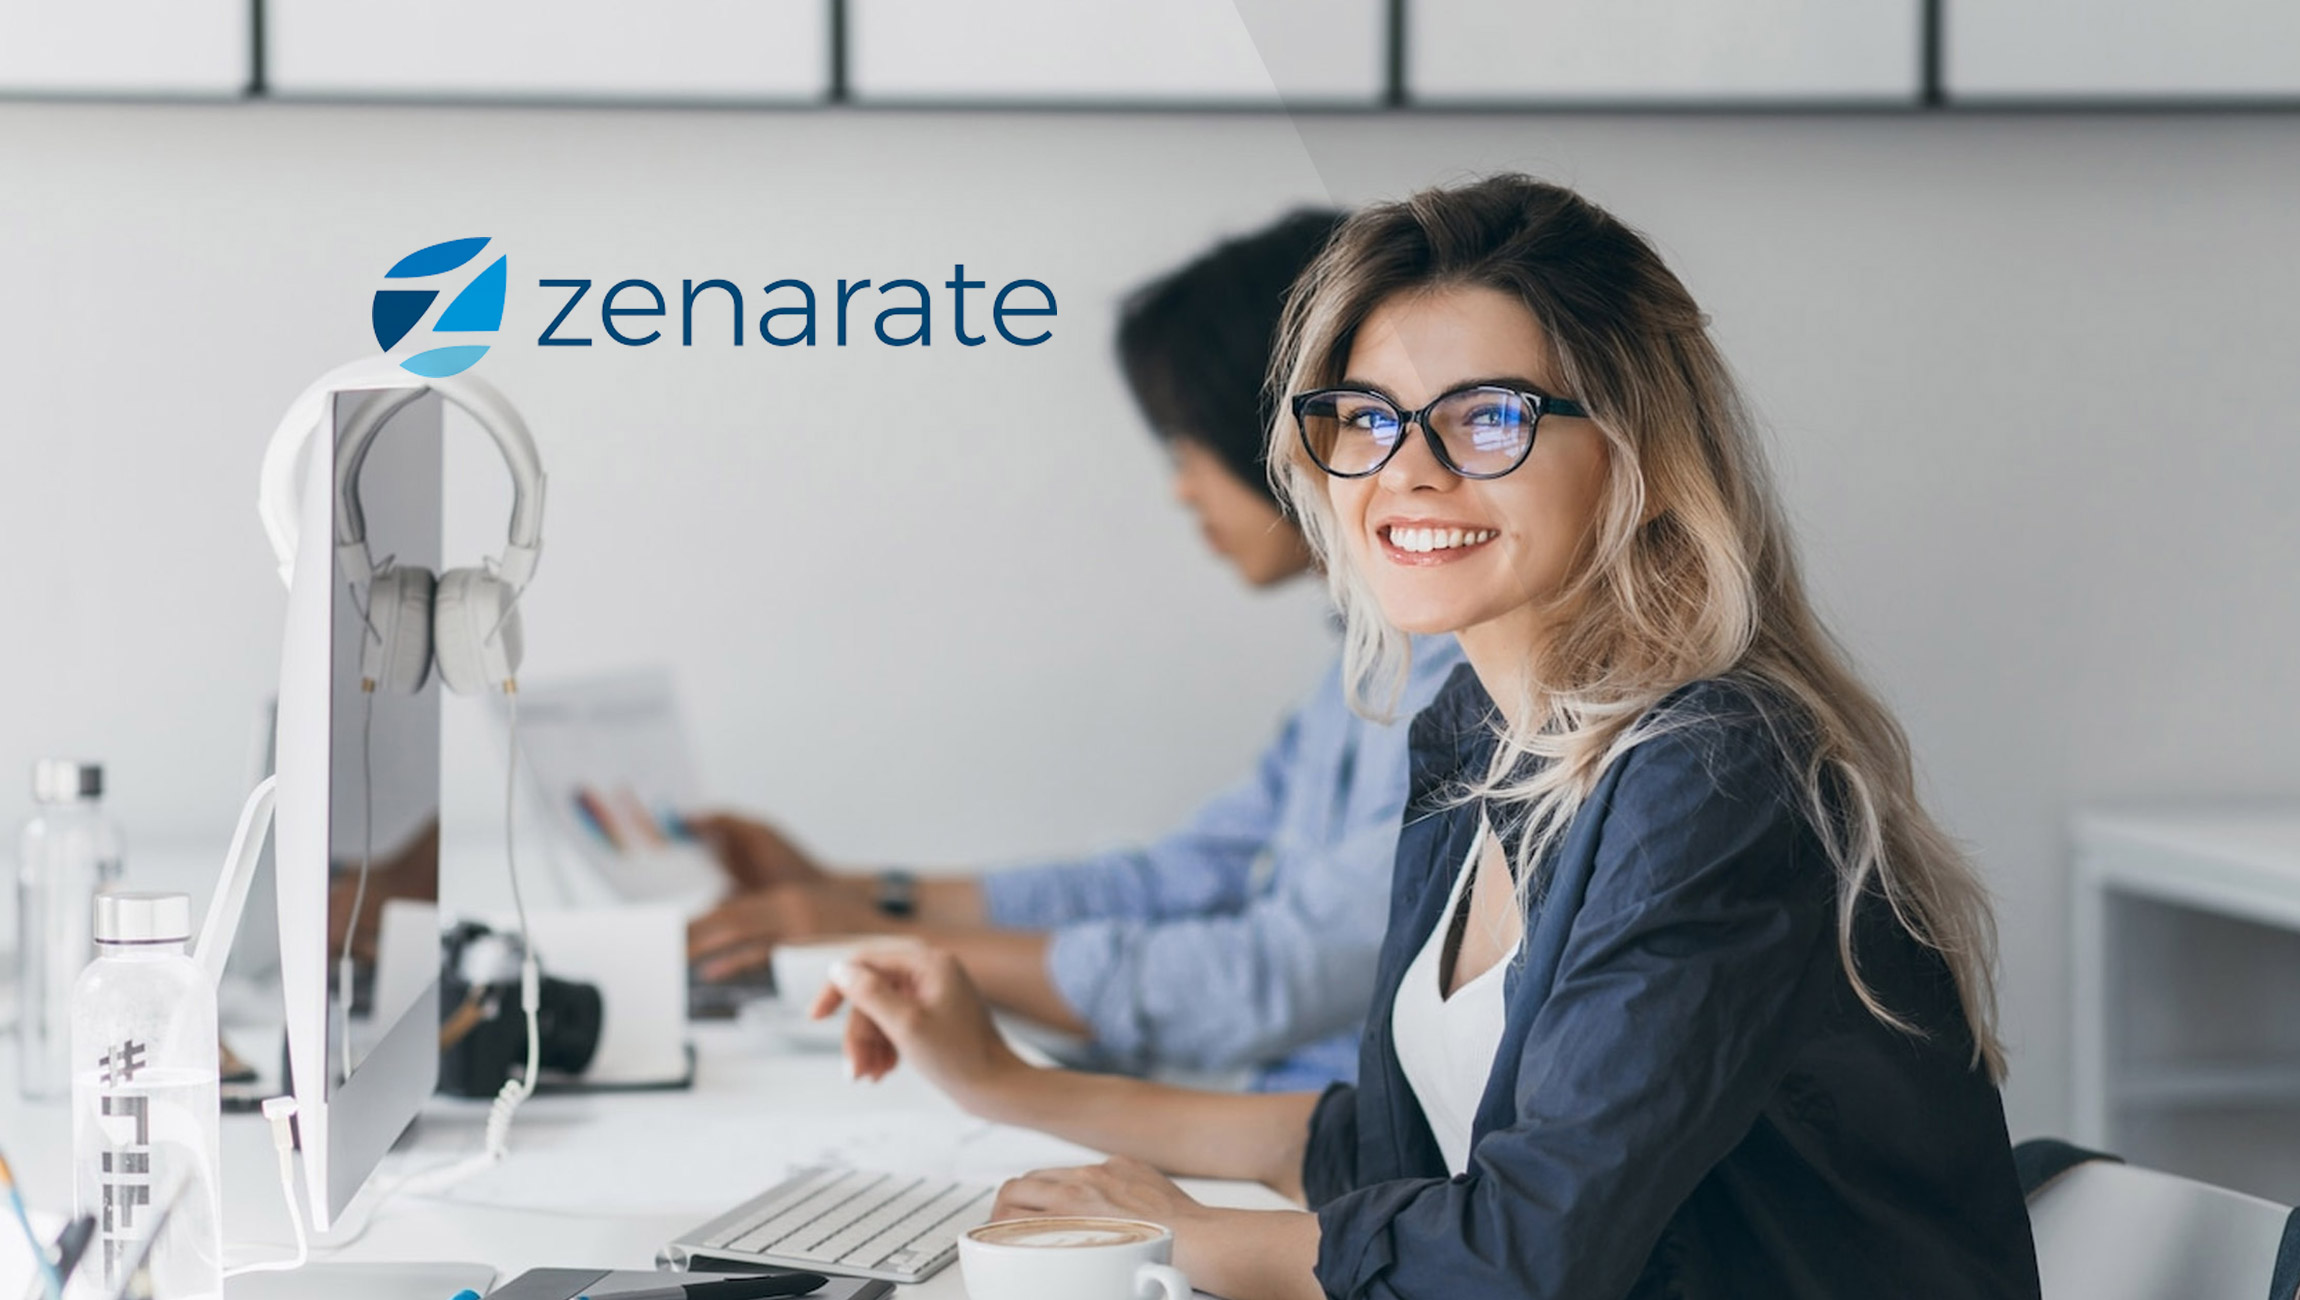 Zenarate Recognized by G2 as a High Performer For 'Contact Center Quality Assurance Software'